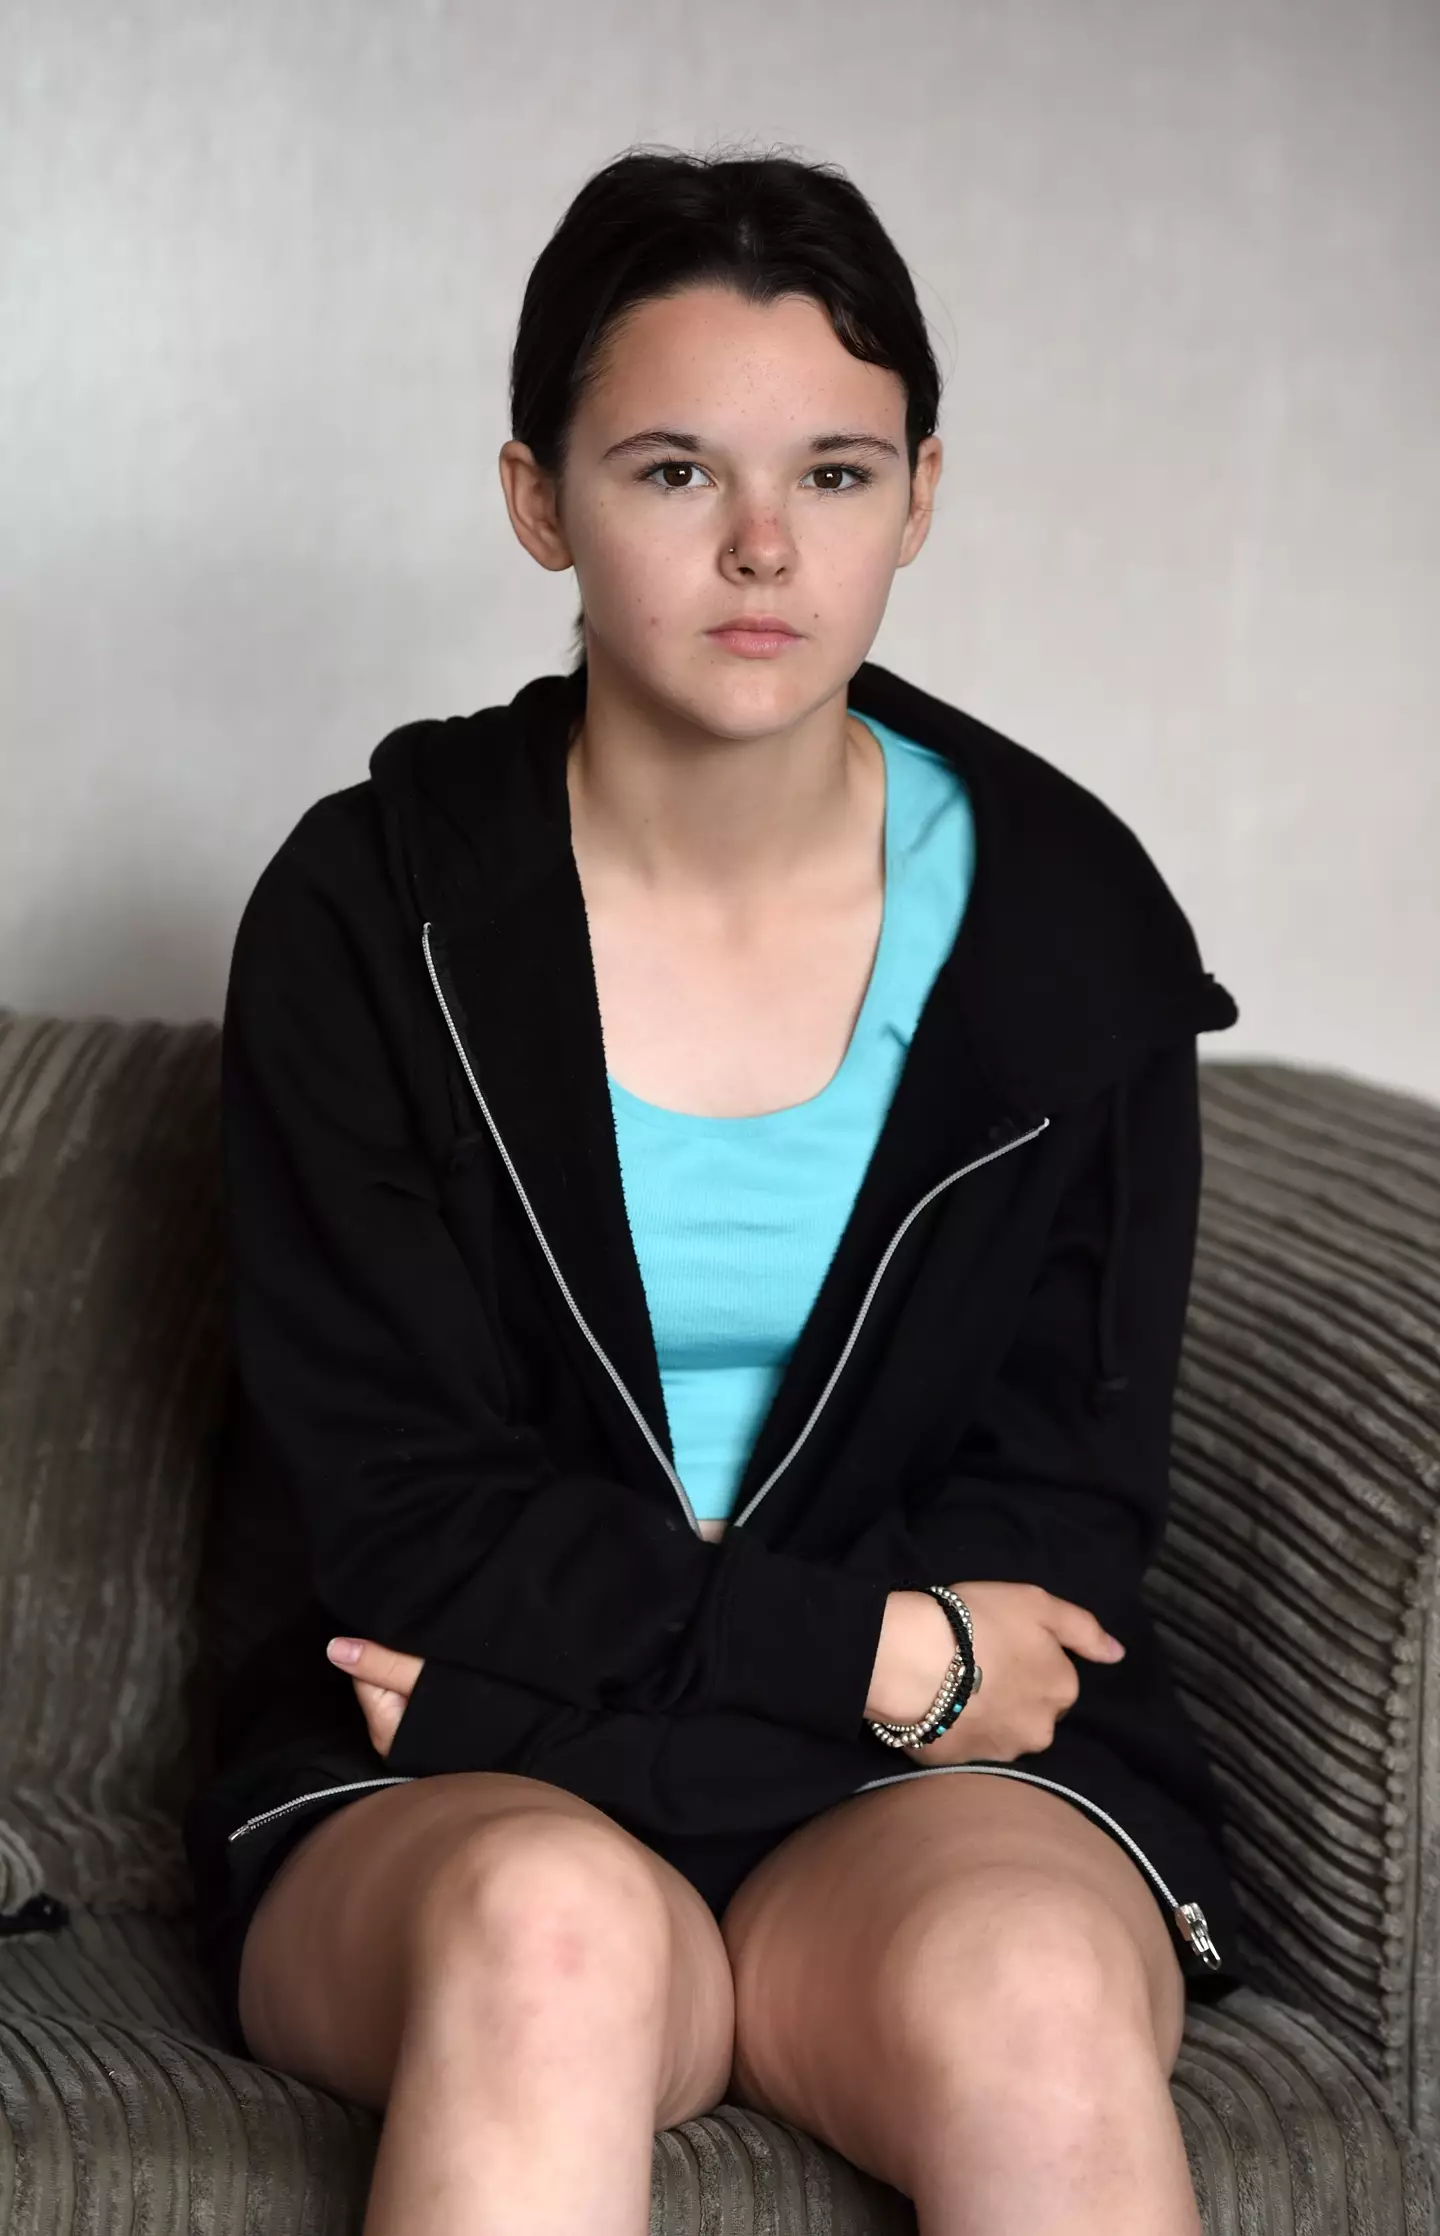 Millie Taylor, 13, tragically lost her toe in a gory funfair incident.